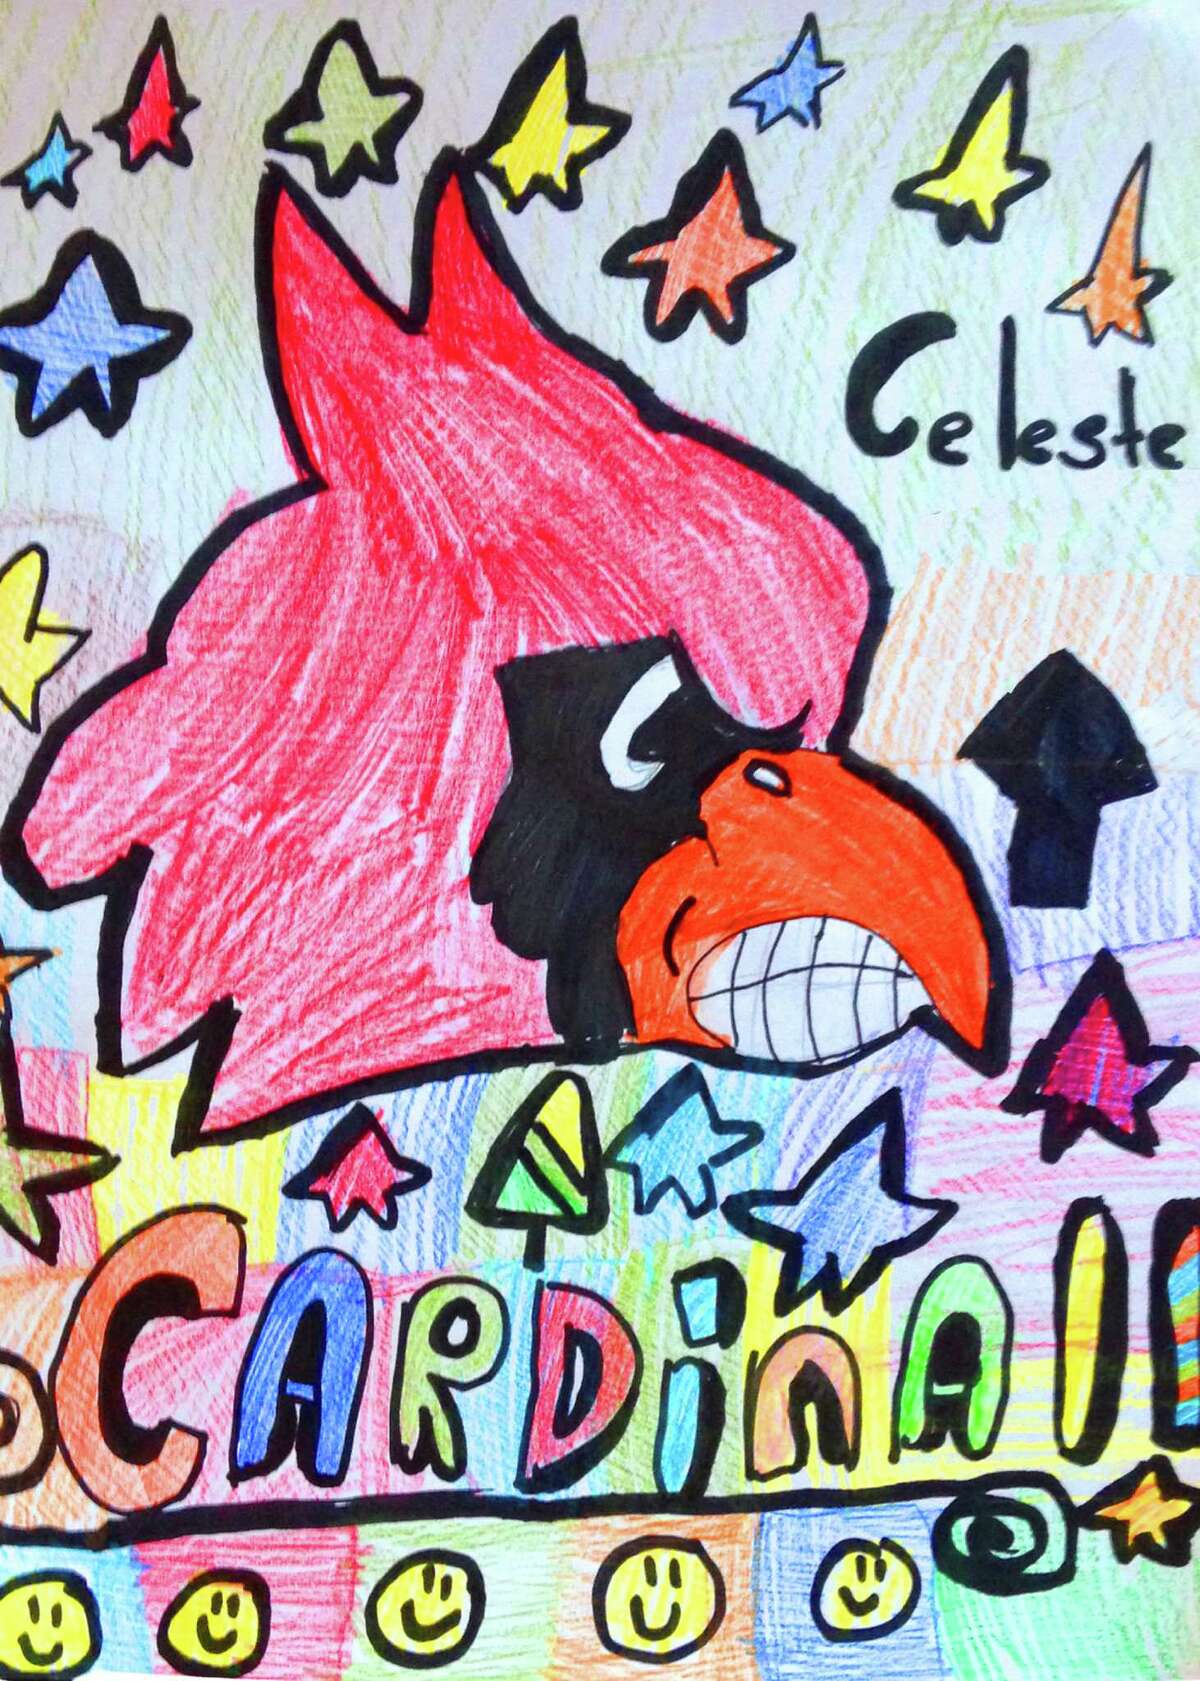 Our Cartoonist of the Week is 10-year-old Celeste Olsoff who attends Riverside School. Celeste likes reading "Peanuts" comic strips by Charles Schultz, featuring her favorite character, Snoopy. She also likes drawing sports mascots. Instructor Phil Lohmeyer chose Celeste's drawing of a Greenwich Cardinal because it captures the intense emotion of a competitive mascot, and also includes many vivid background elements. Besides cartooning, Celeste enjoys creating clay animals and learning about the artwork of Frida Kahlo. She tells other young cartoonists, "Do not give up!" Celeste takes cartooning classes with Lohmeyer (philliplohmeyer@yahoo.com), an artist from Cos Cob who teaches group lessons at the Eastern Greenwich Civic Center (203-637-4583) and private lessons at Jack Dog Studio on Greenwich Avenue (203-570-6870).